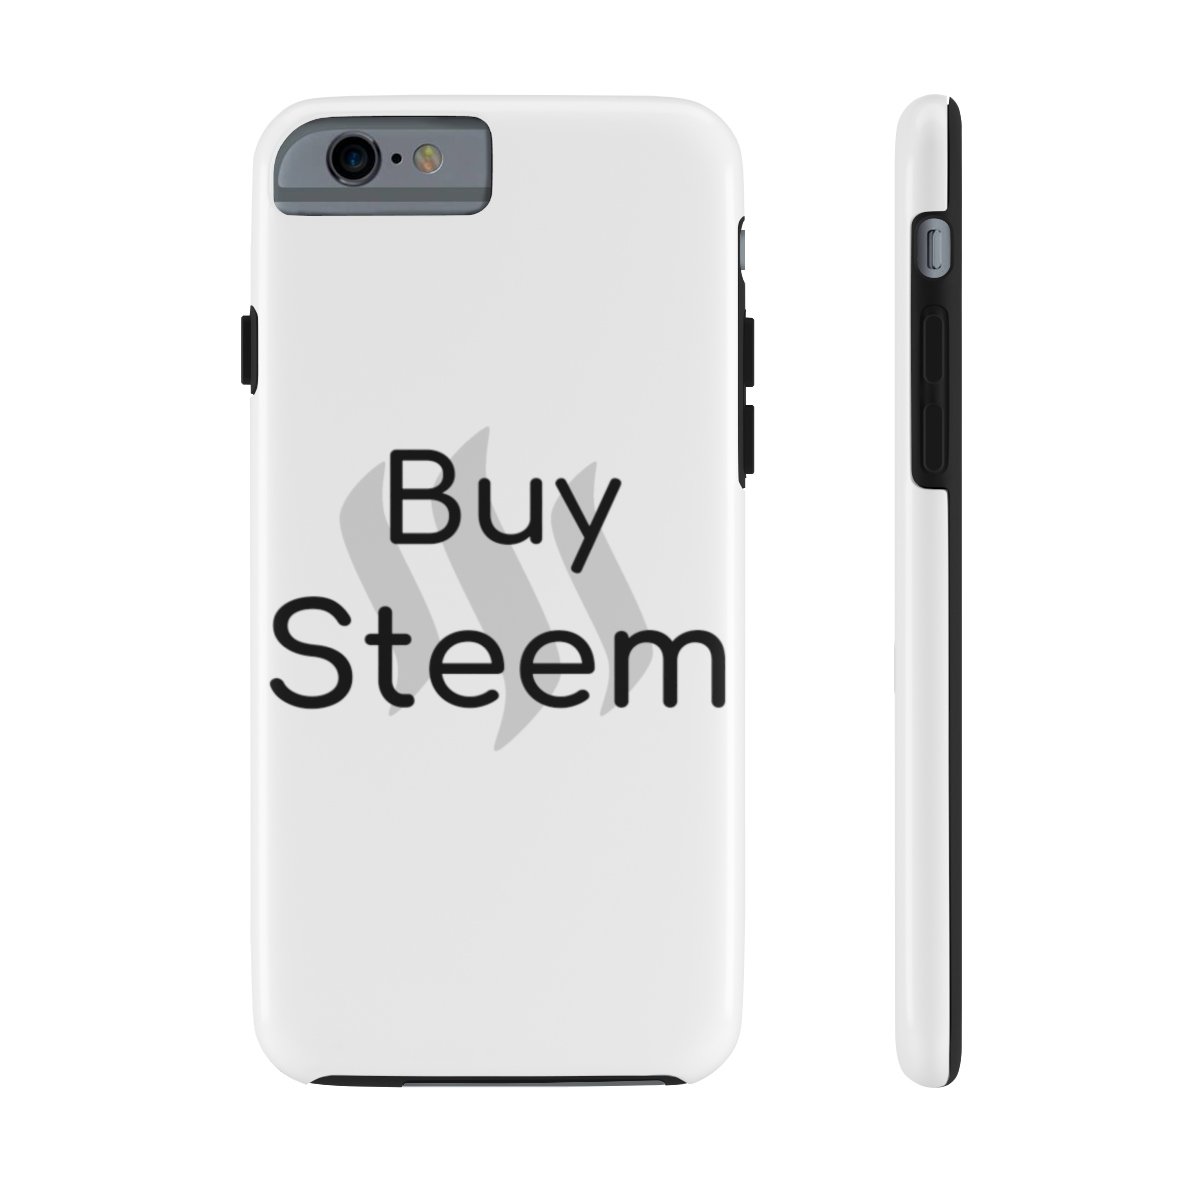 Buy steem - Phone Cases TCP1607 iPhone 6/6s Tough Official Crypto  Merch